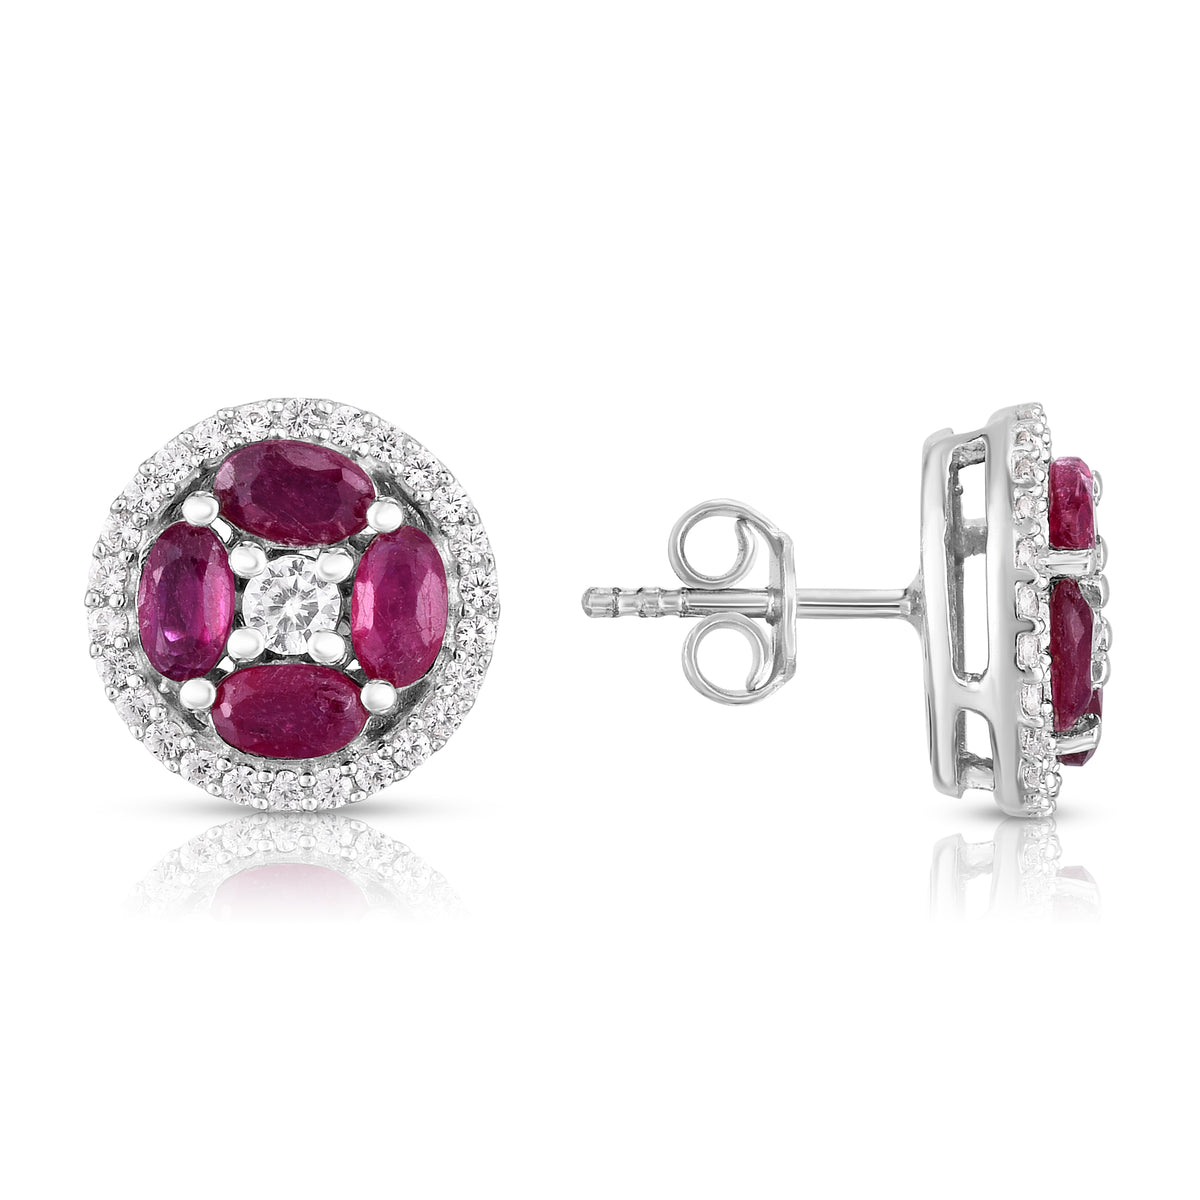 2.00 Carat Natural Ruby and White Zircon Stud Earrings – www